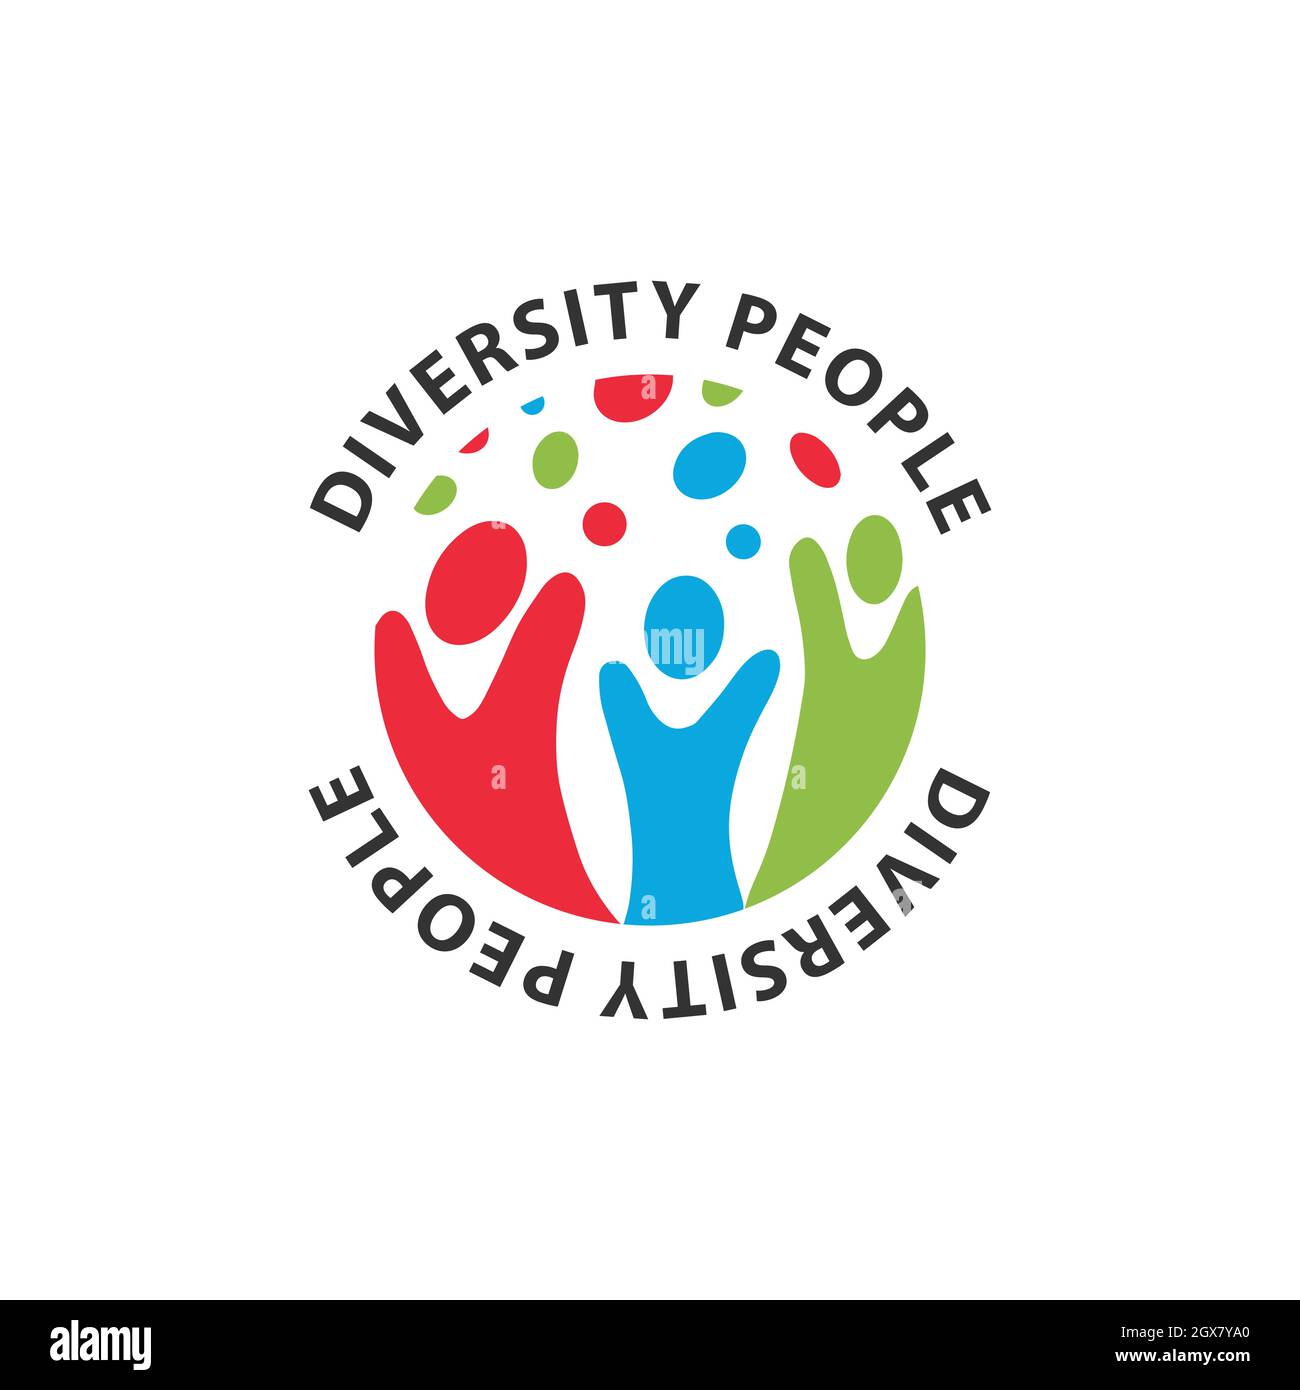 Diversity and inclusion Stock Vector Images - Alamy